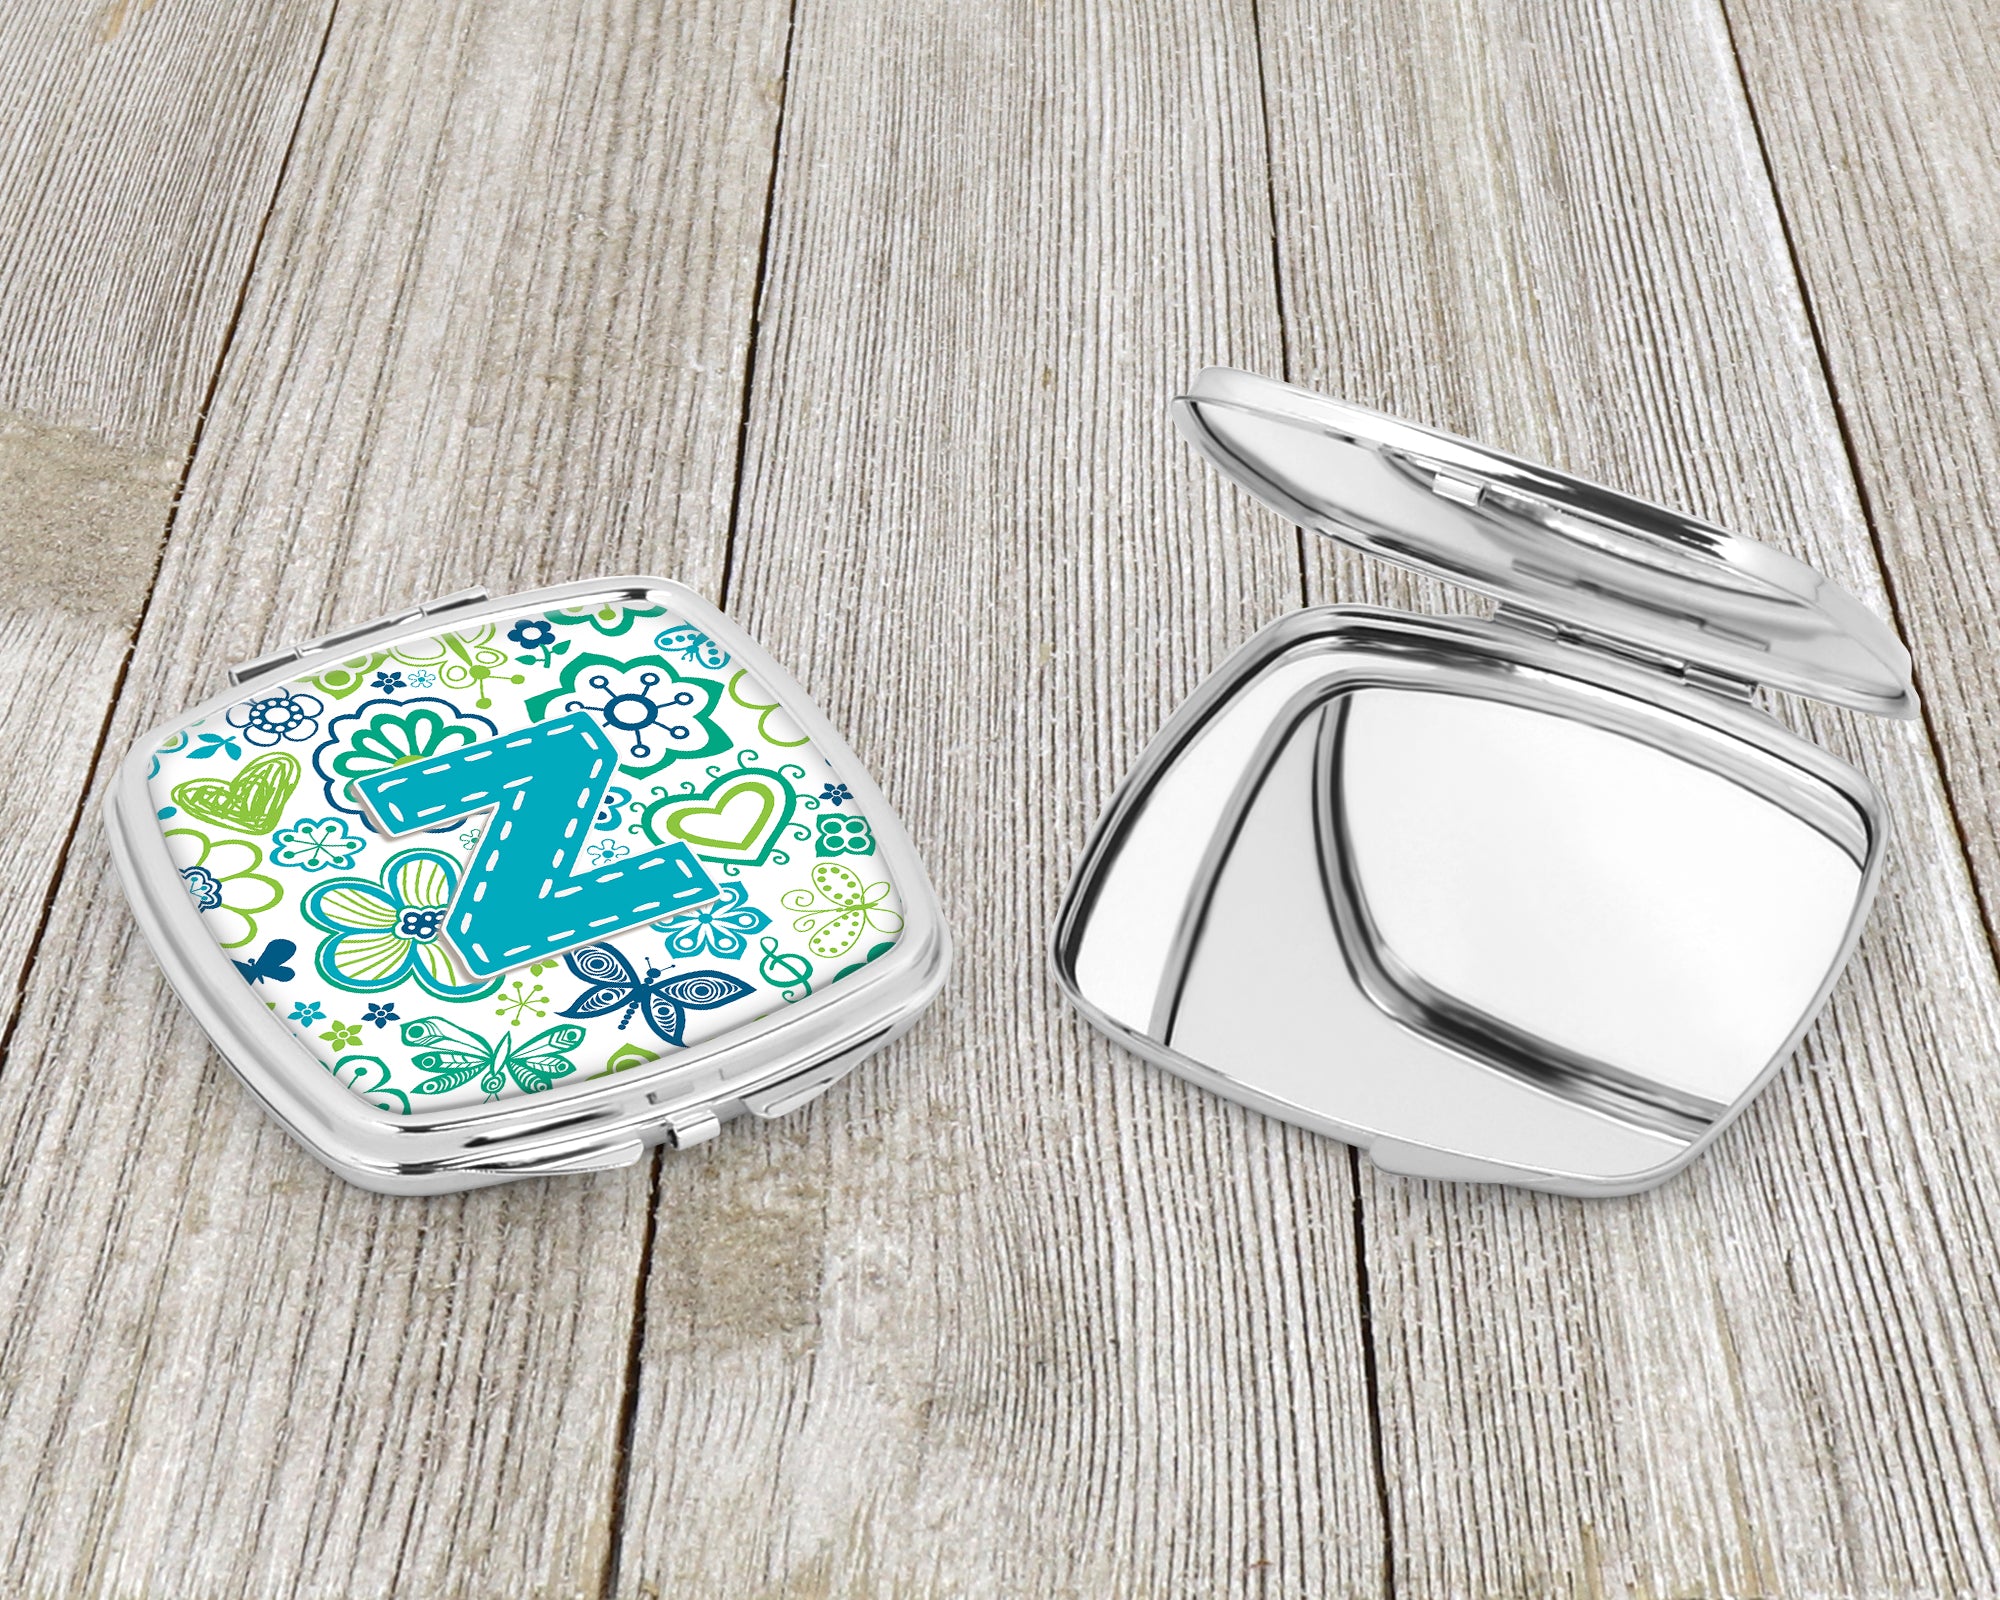 Letter Z Flowers and Butterflies Teal Blue Compact Mirror CJ2006-ZSCM